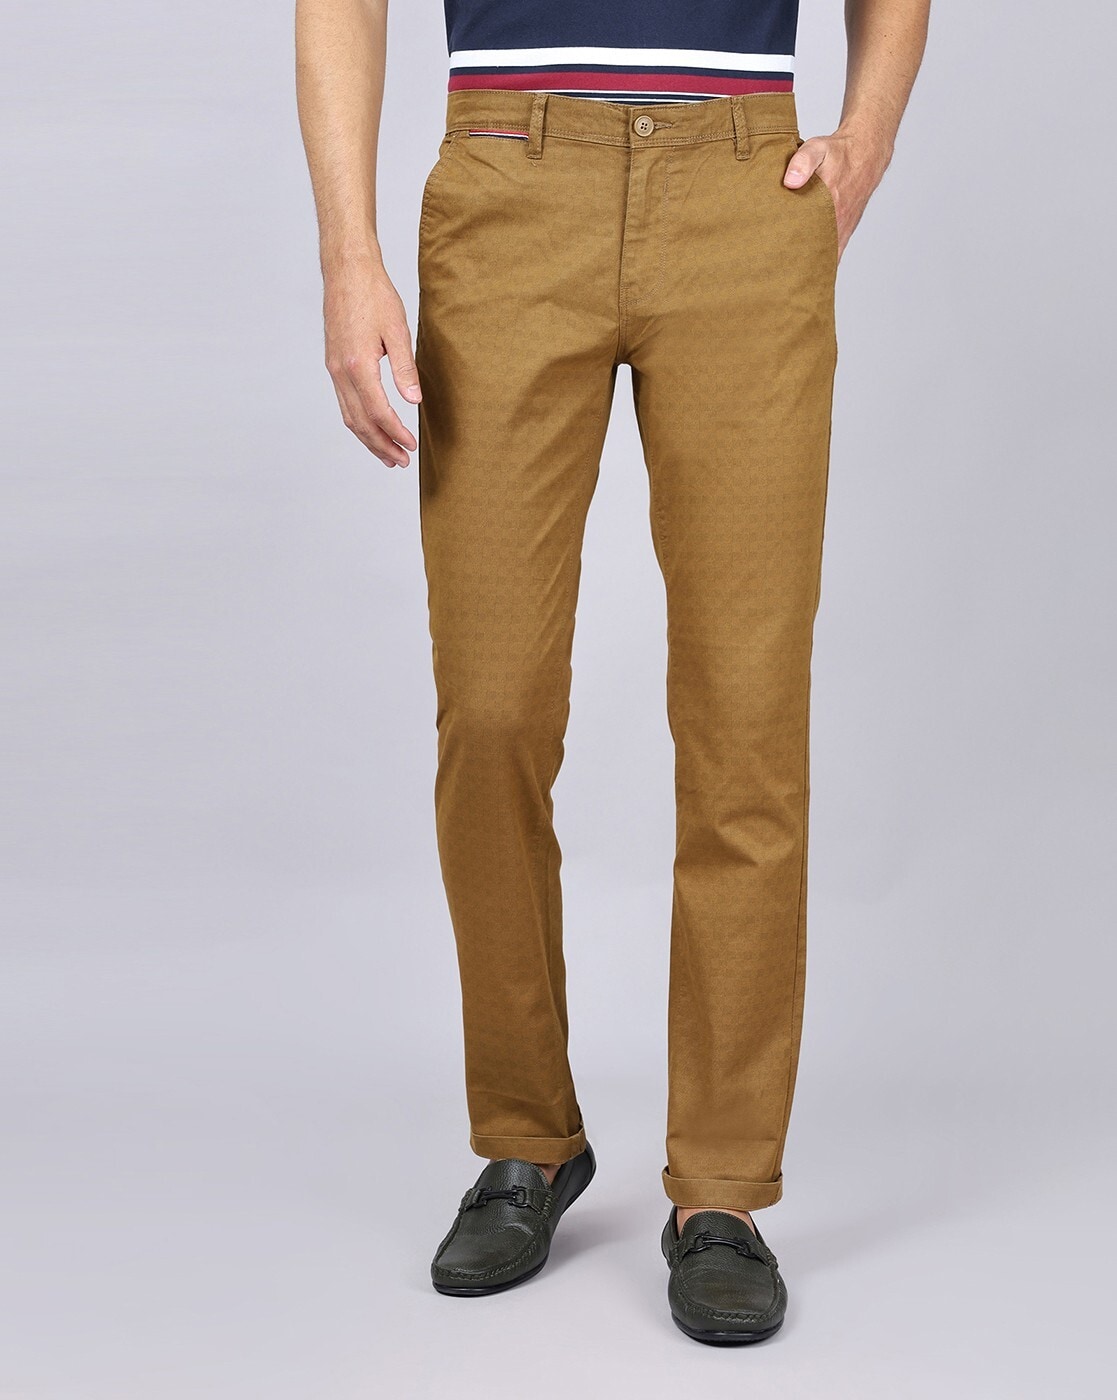 What Color Shoes to Wear with Khaki Pants?